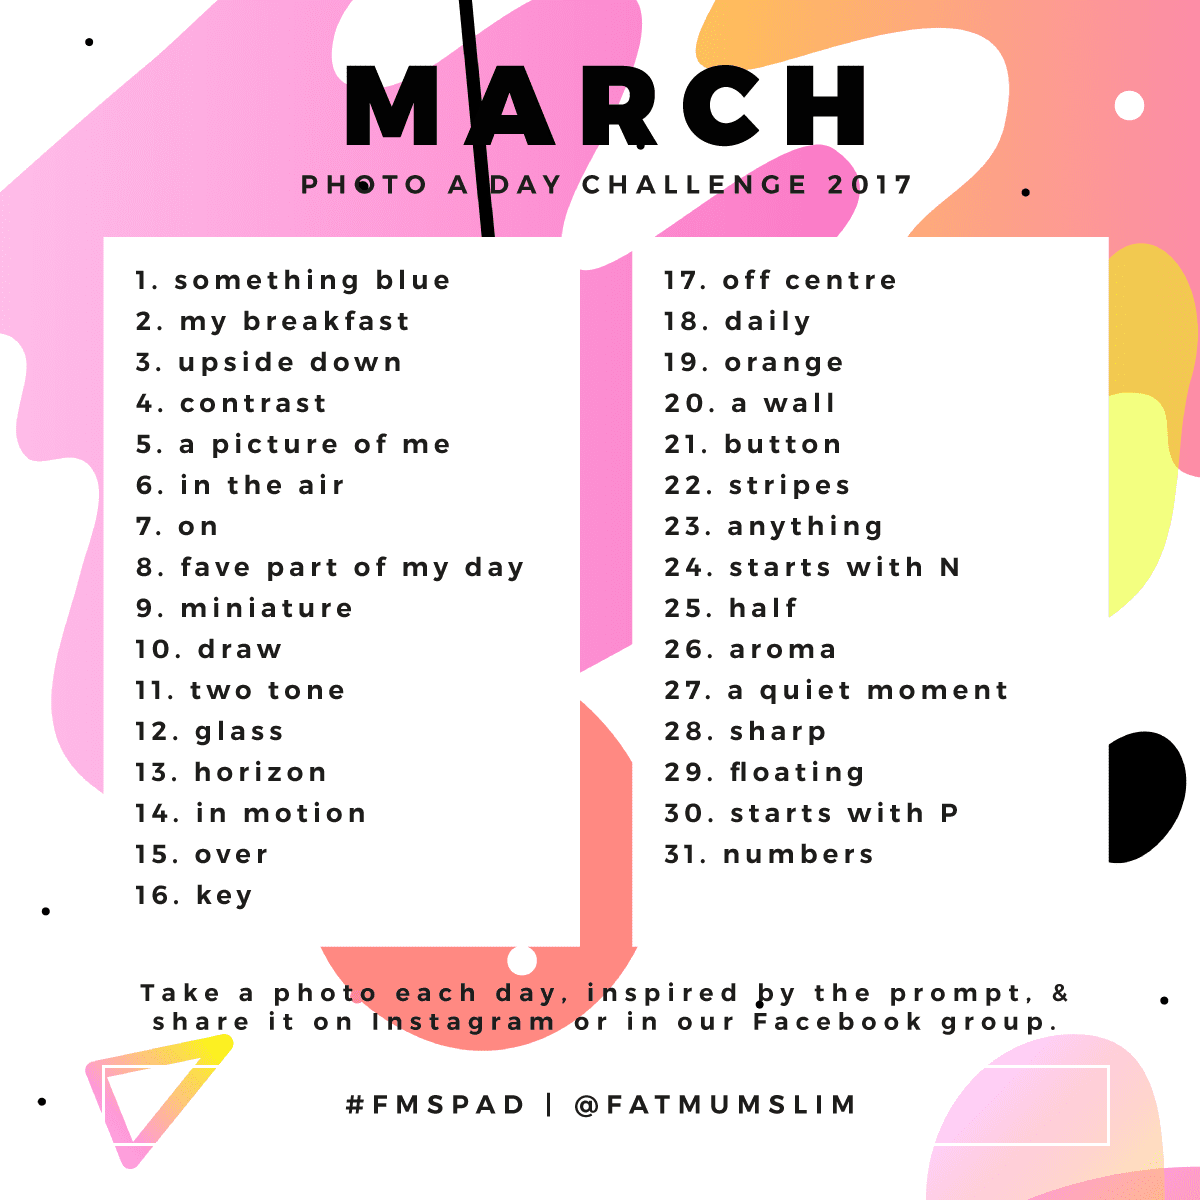 March Photo A Day Challenge 2017